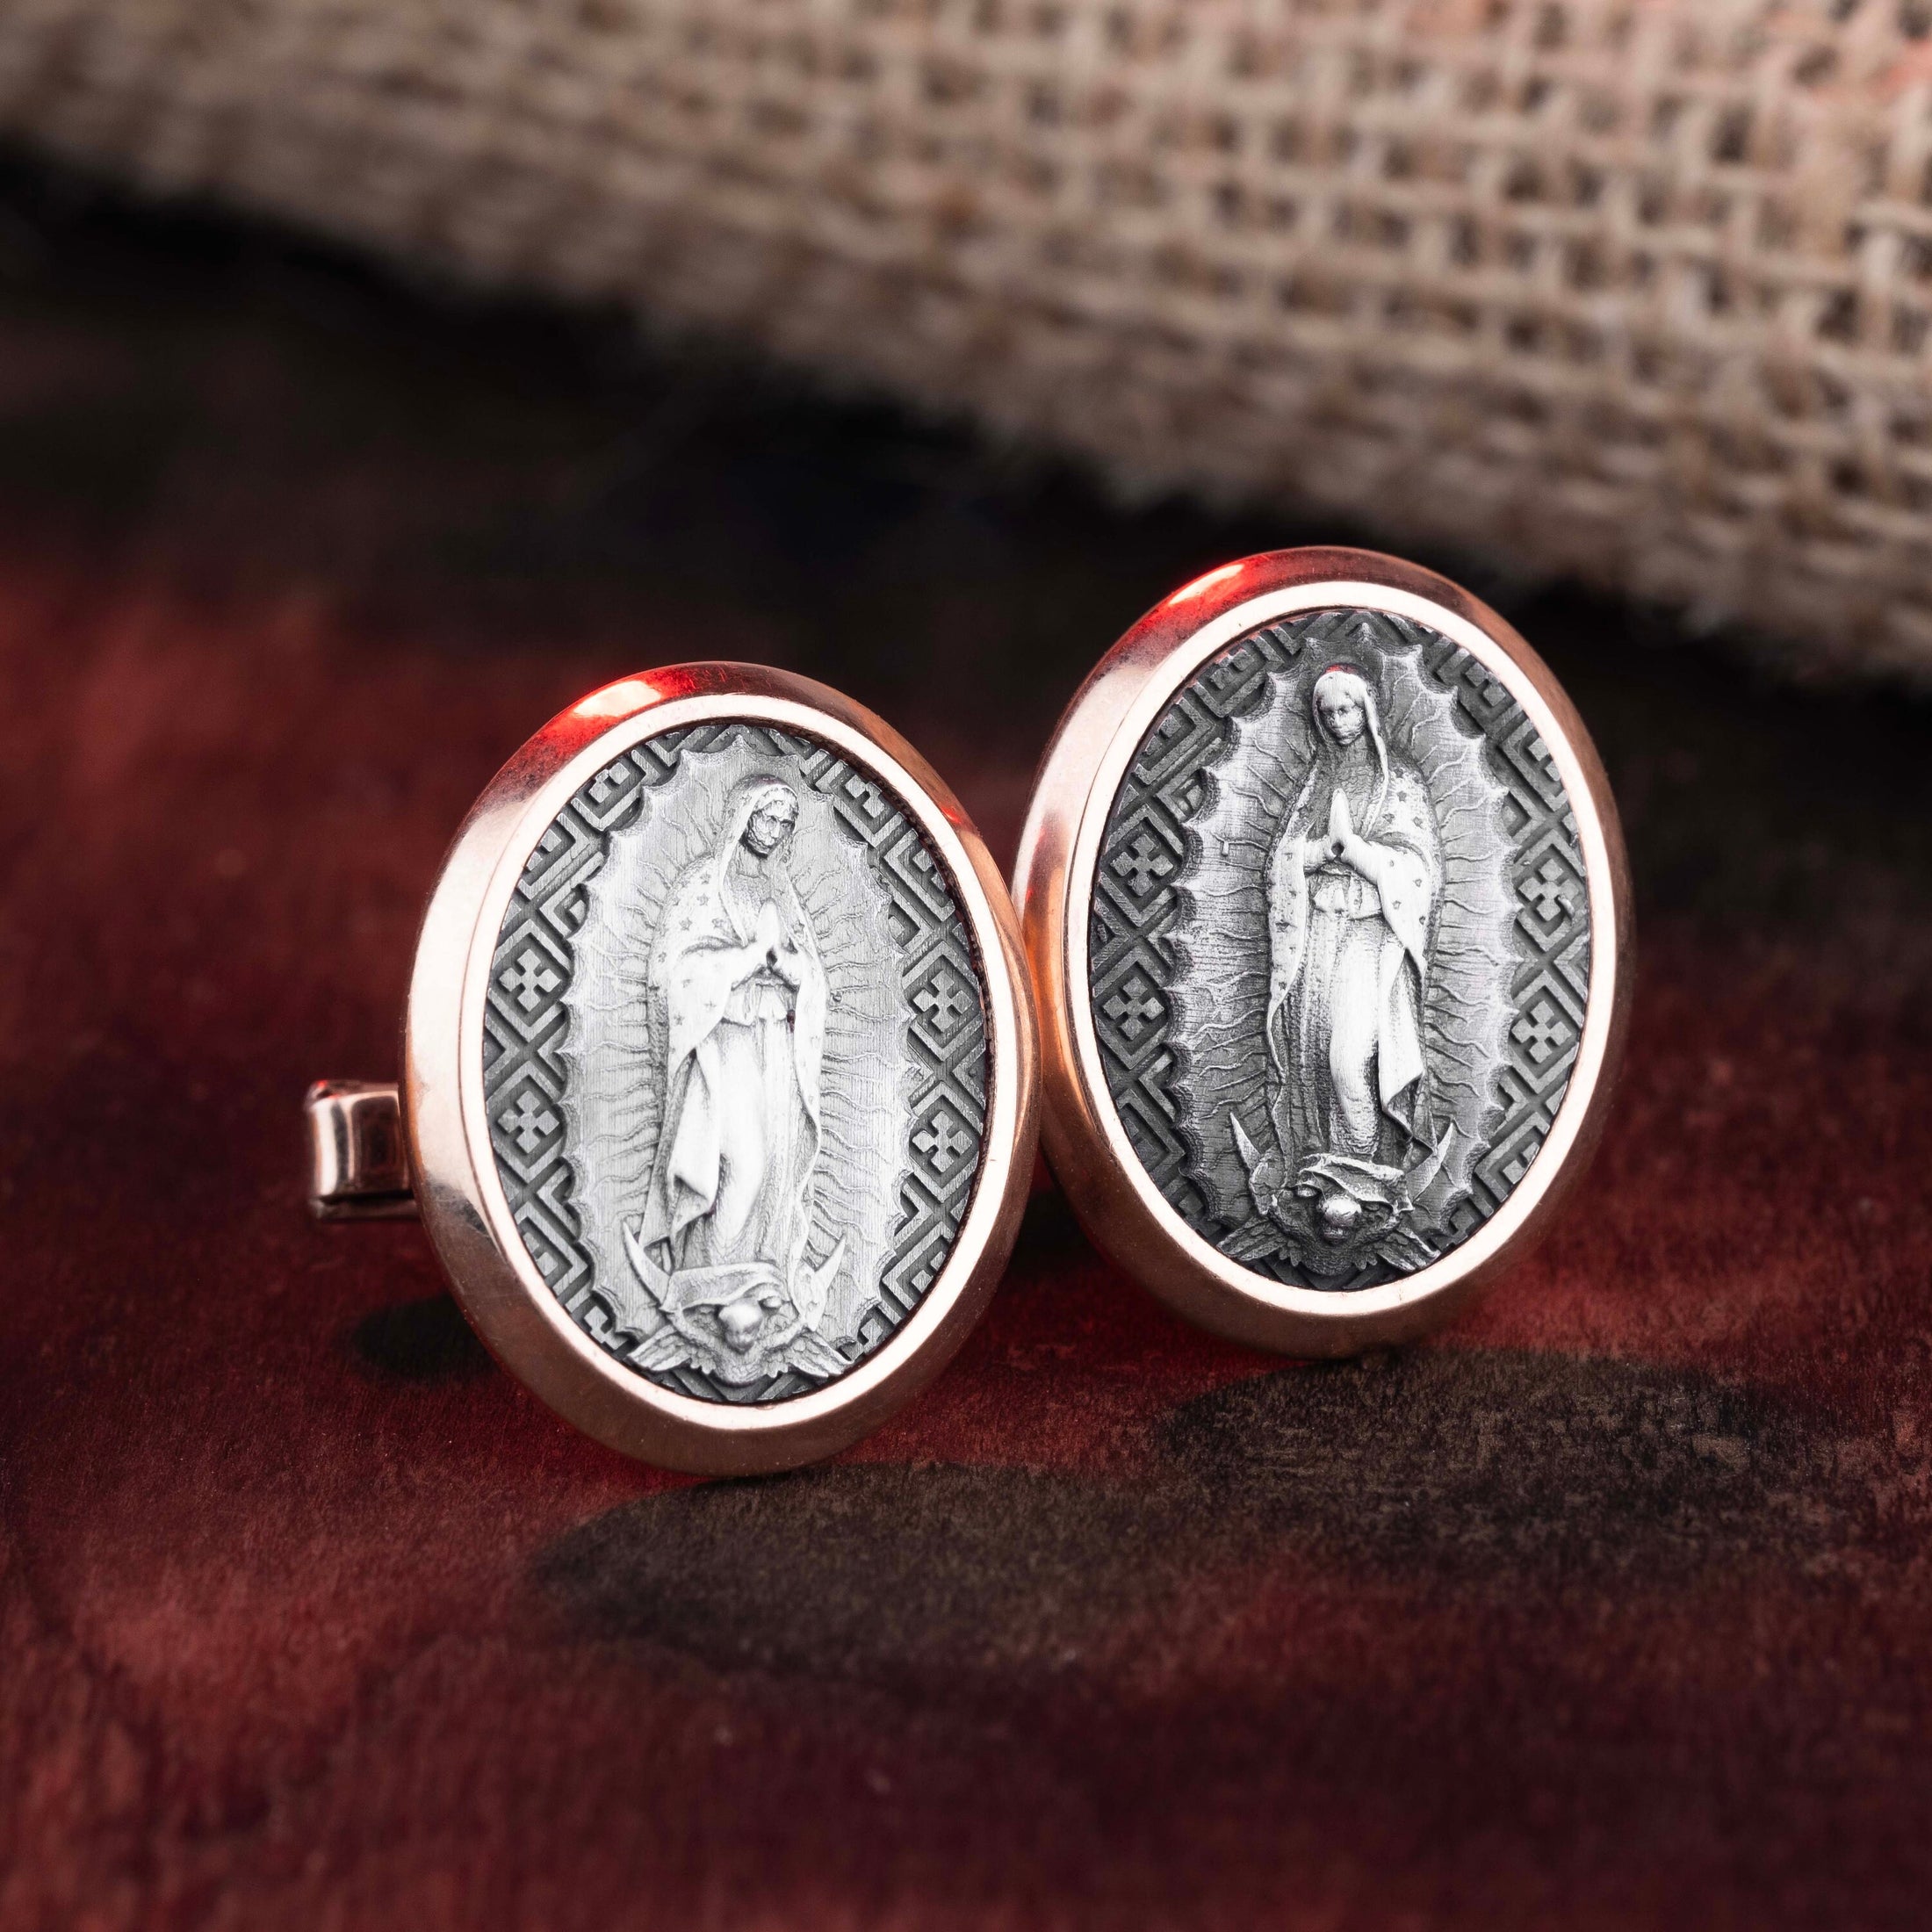 Lady Of Guadalupe Cufflinks, Virgen De Guadalupe, Virgin Mary, Memorial Gift, Catholic Cufflinks, Groomsman Gift, Religious Gift